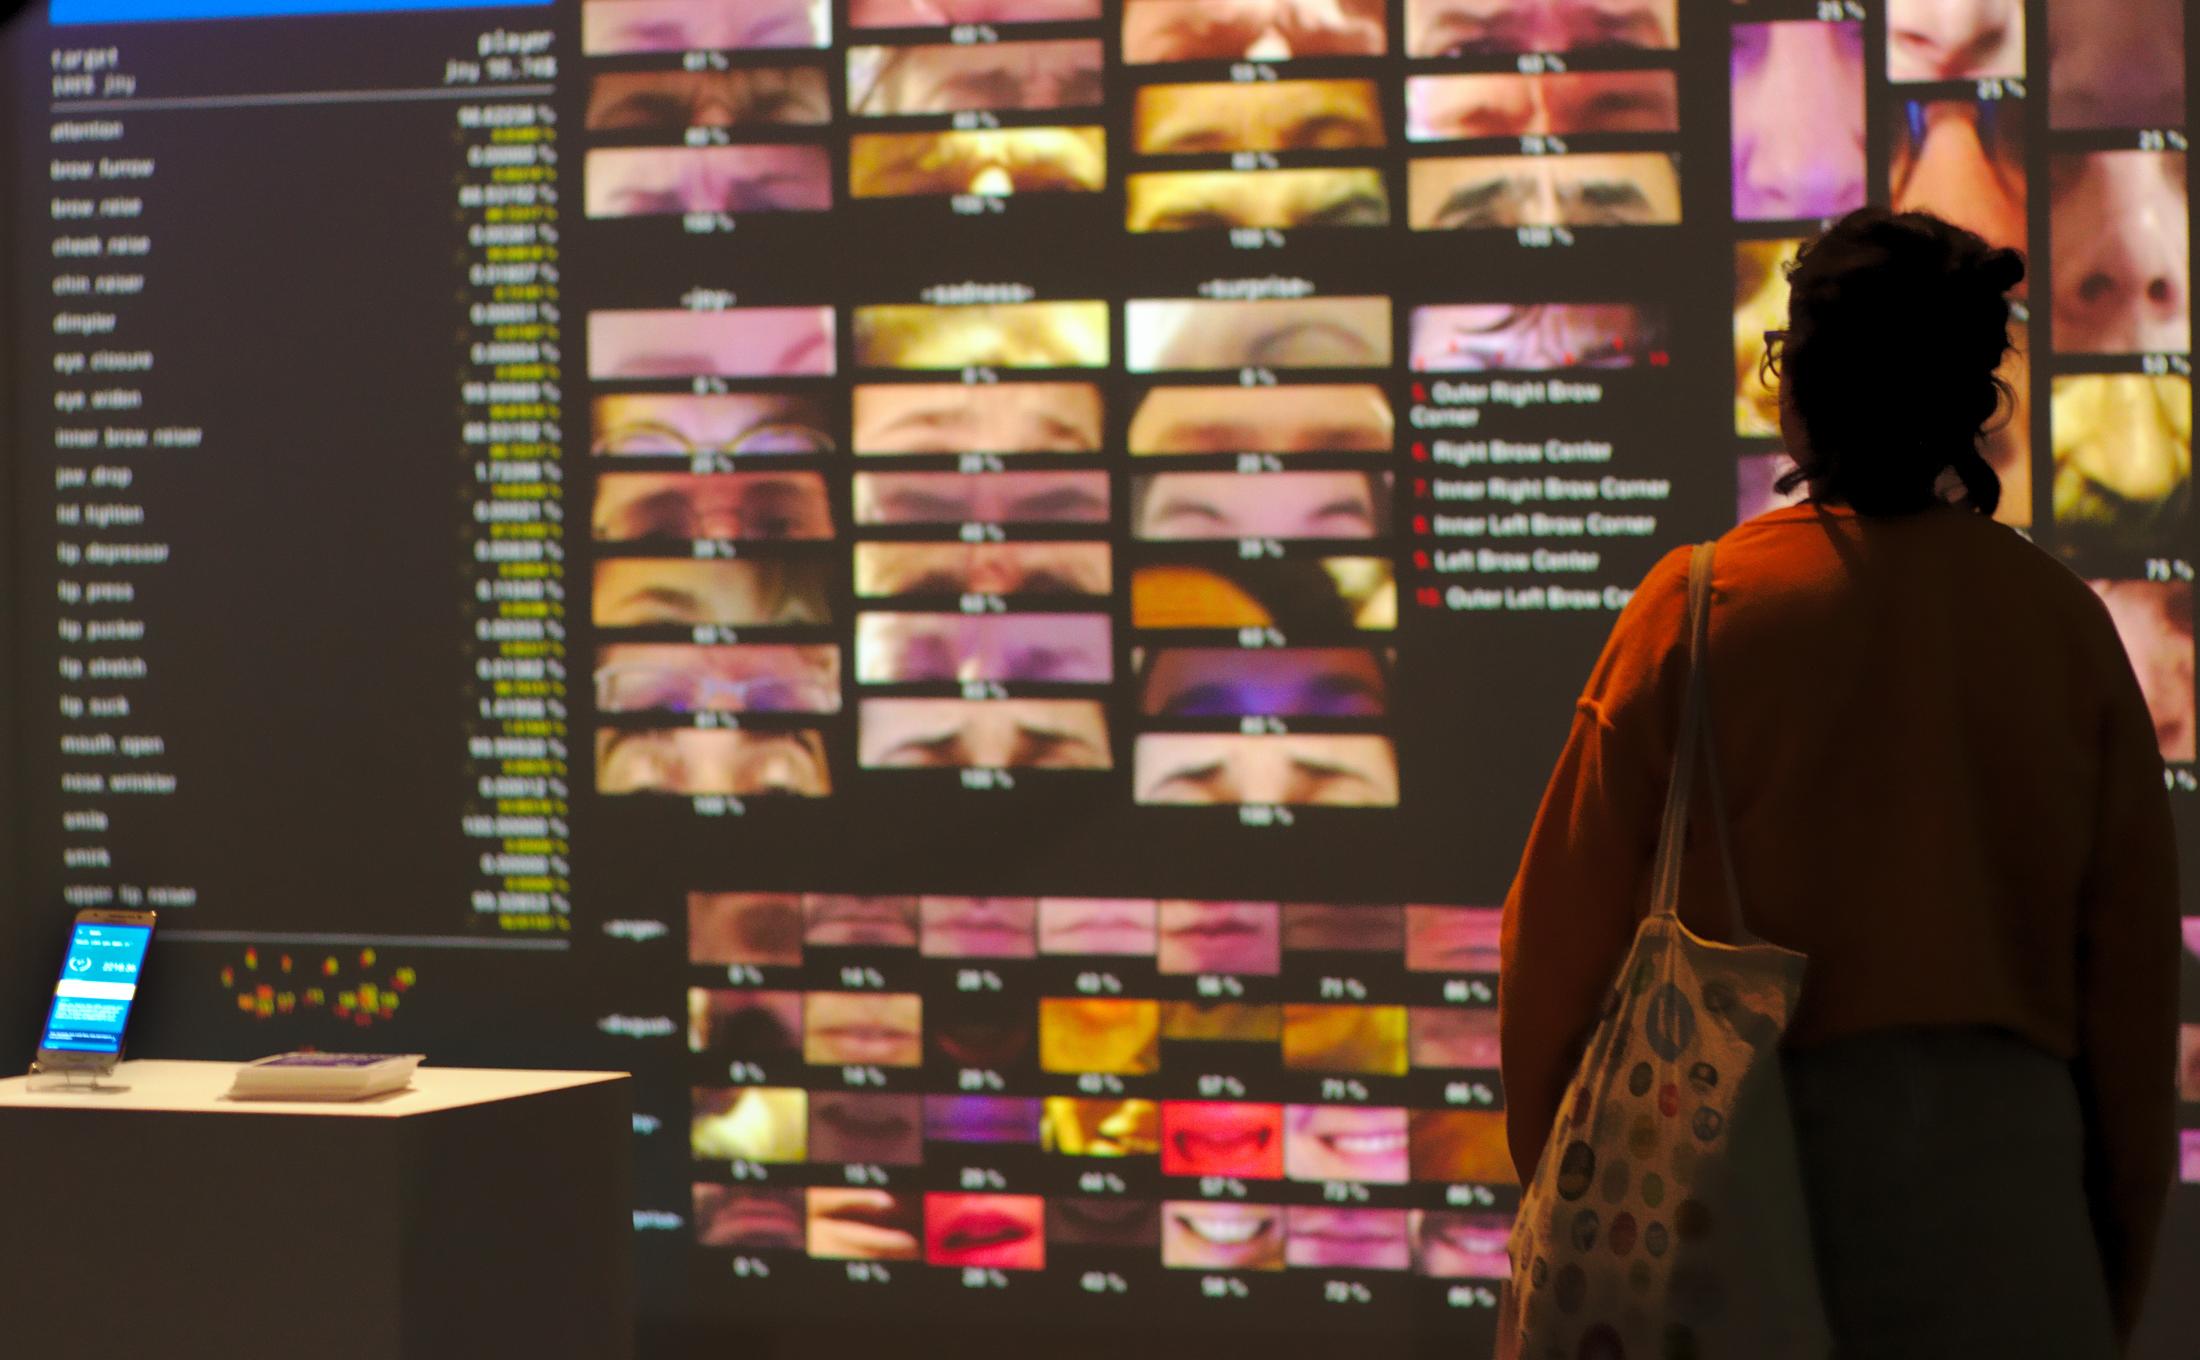 A person stands in front of a screen showing face recognition patterns 